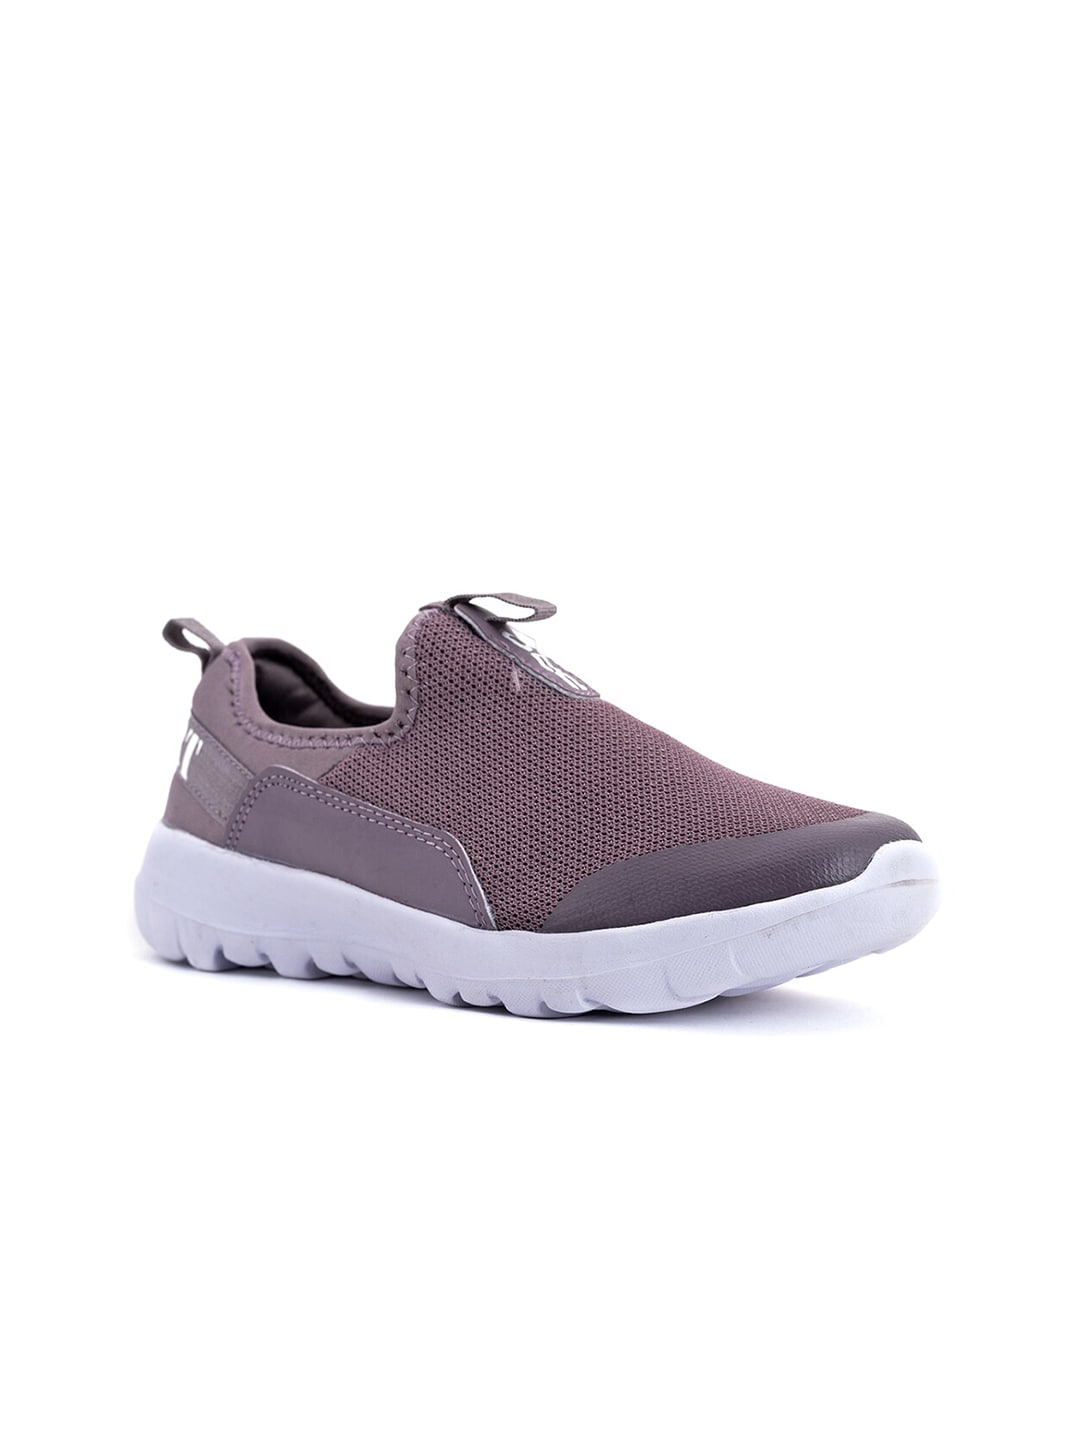 Khadims Women Purple Textile Running Non-Marking Shoes Price in India